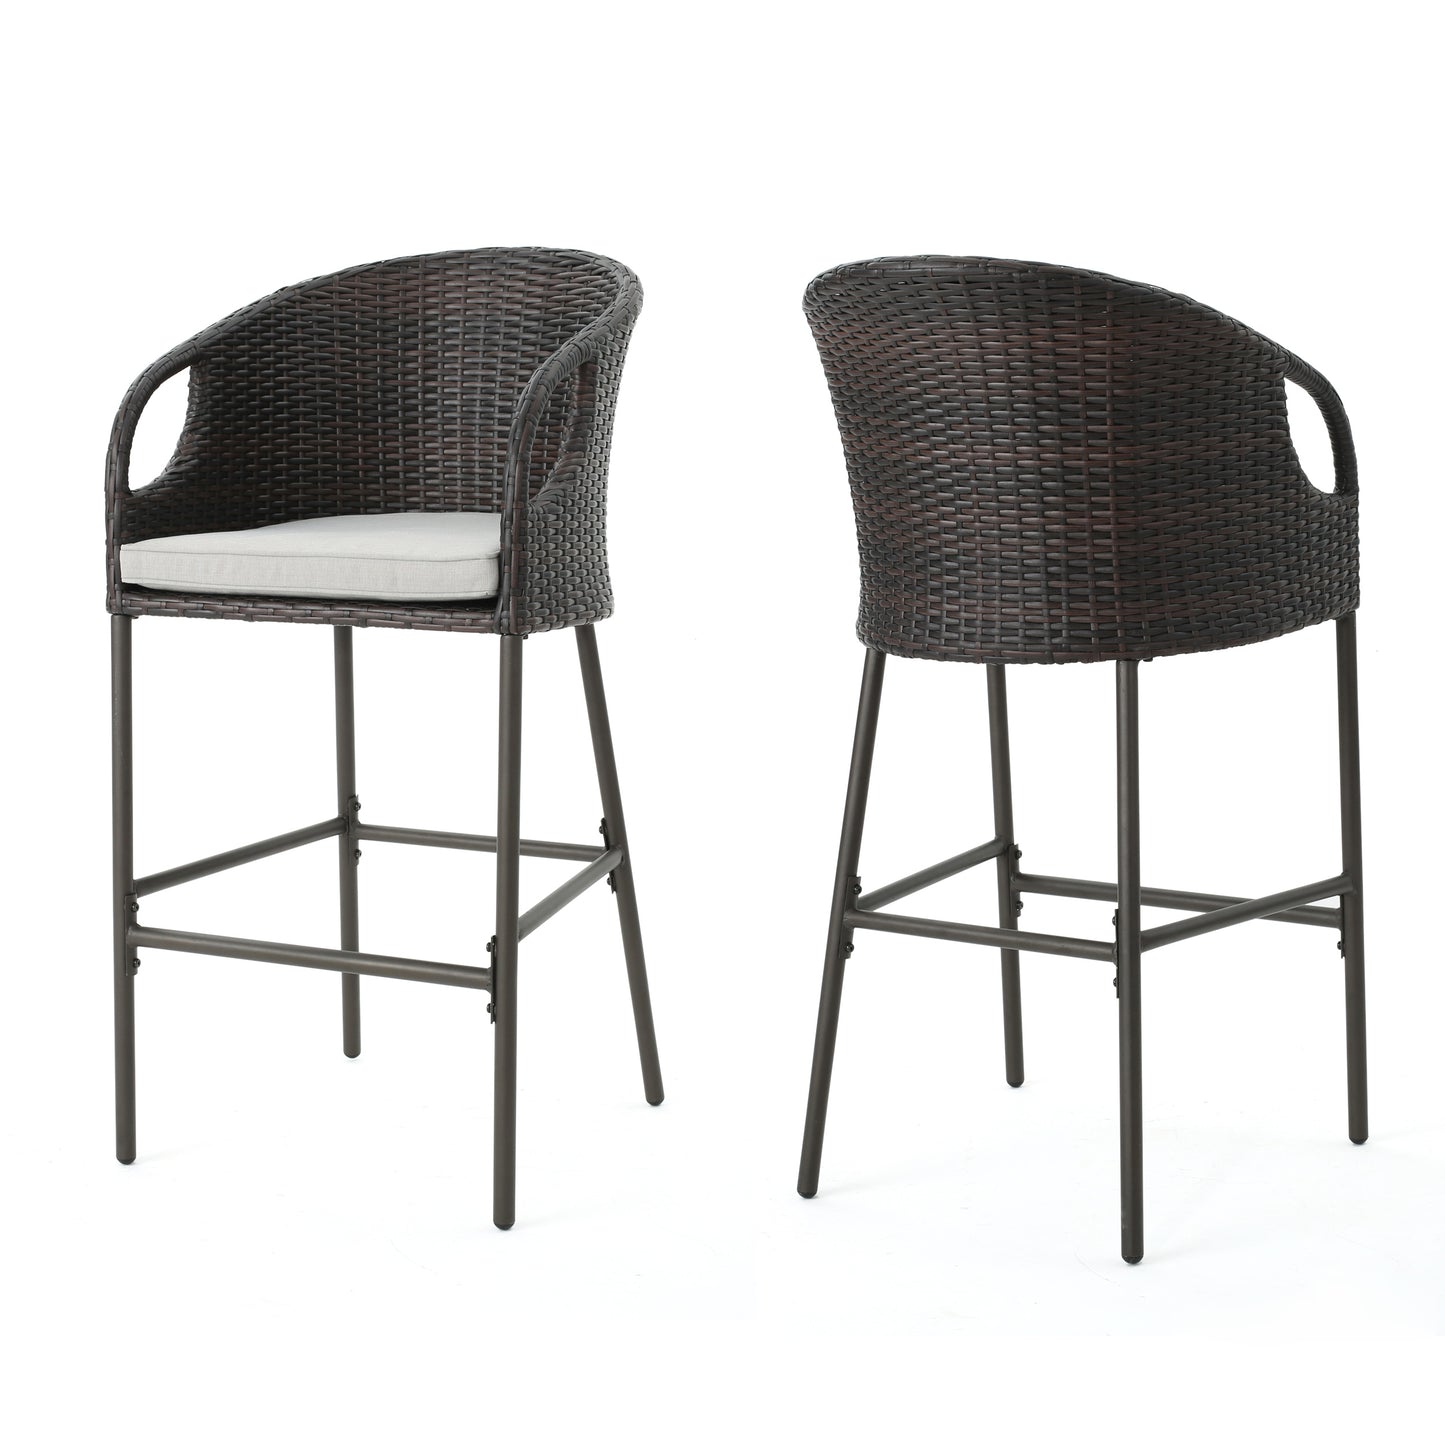 Dunlevy 31-Inch Outdoor Wicker Barstools with Water Resistant Cushions